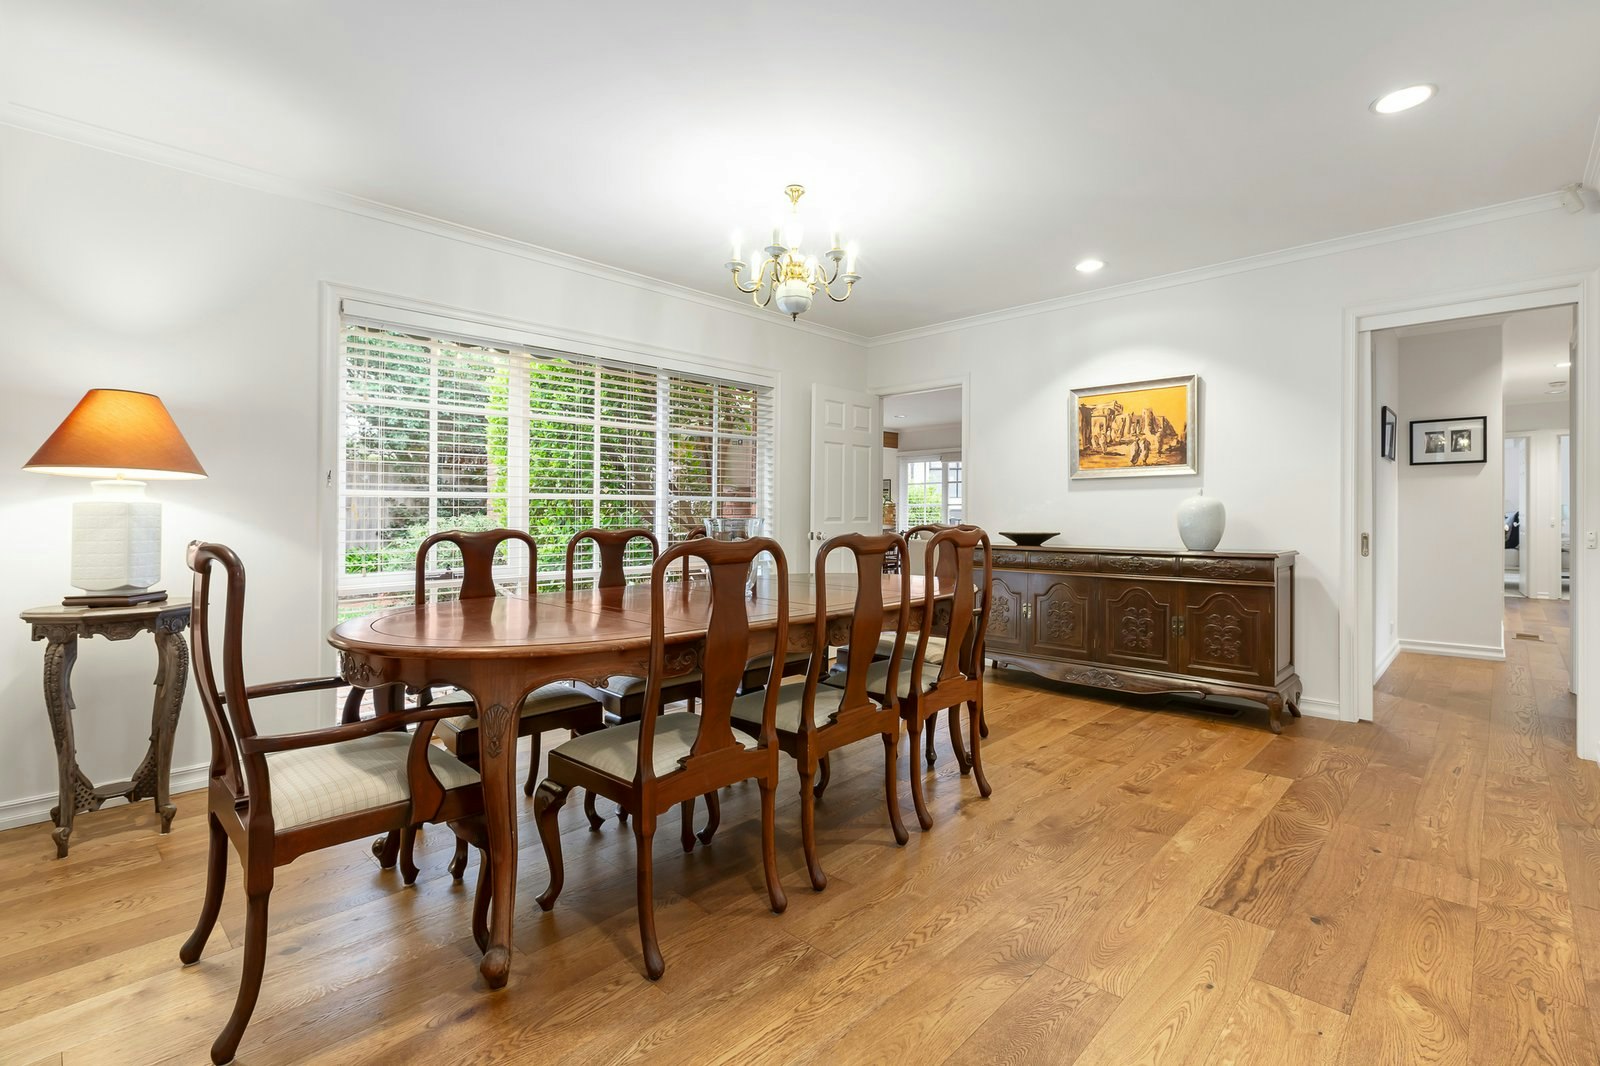 Image of dining room